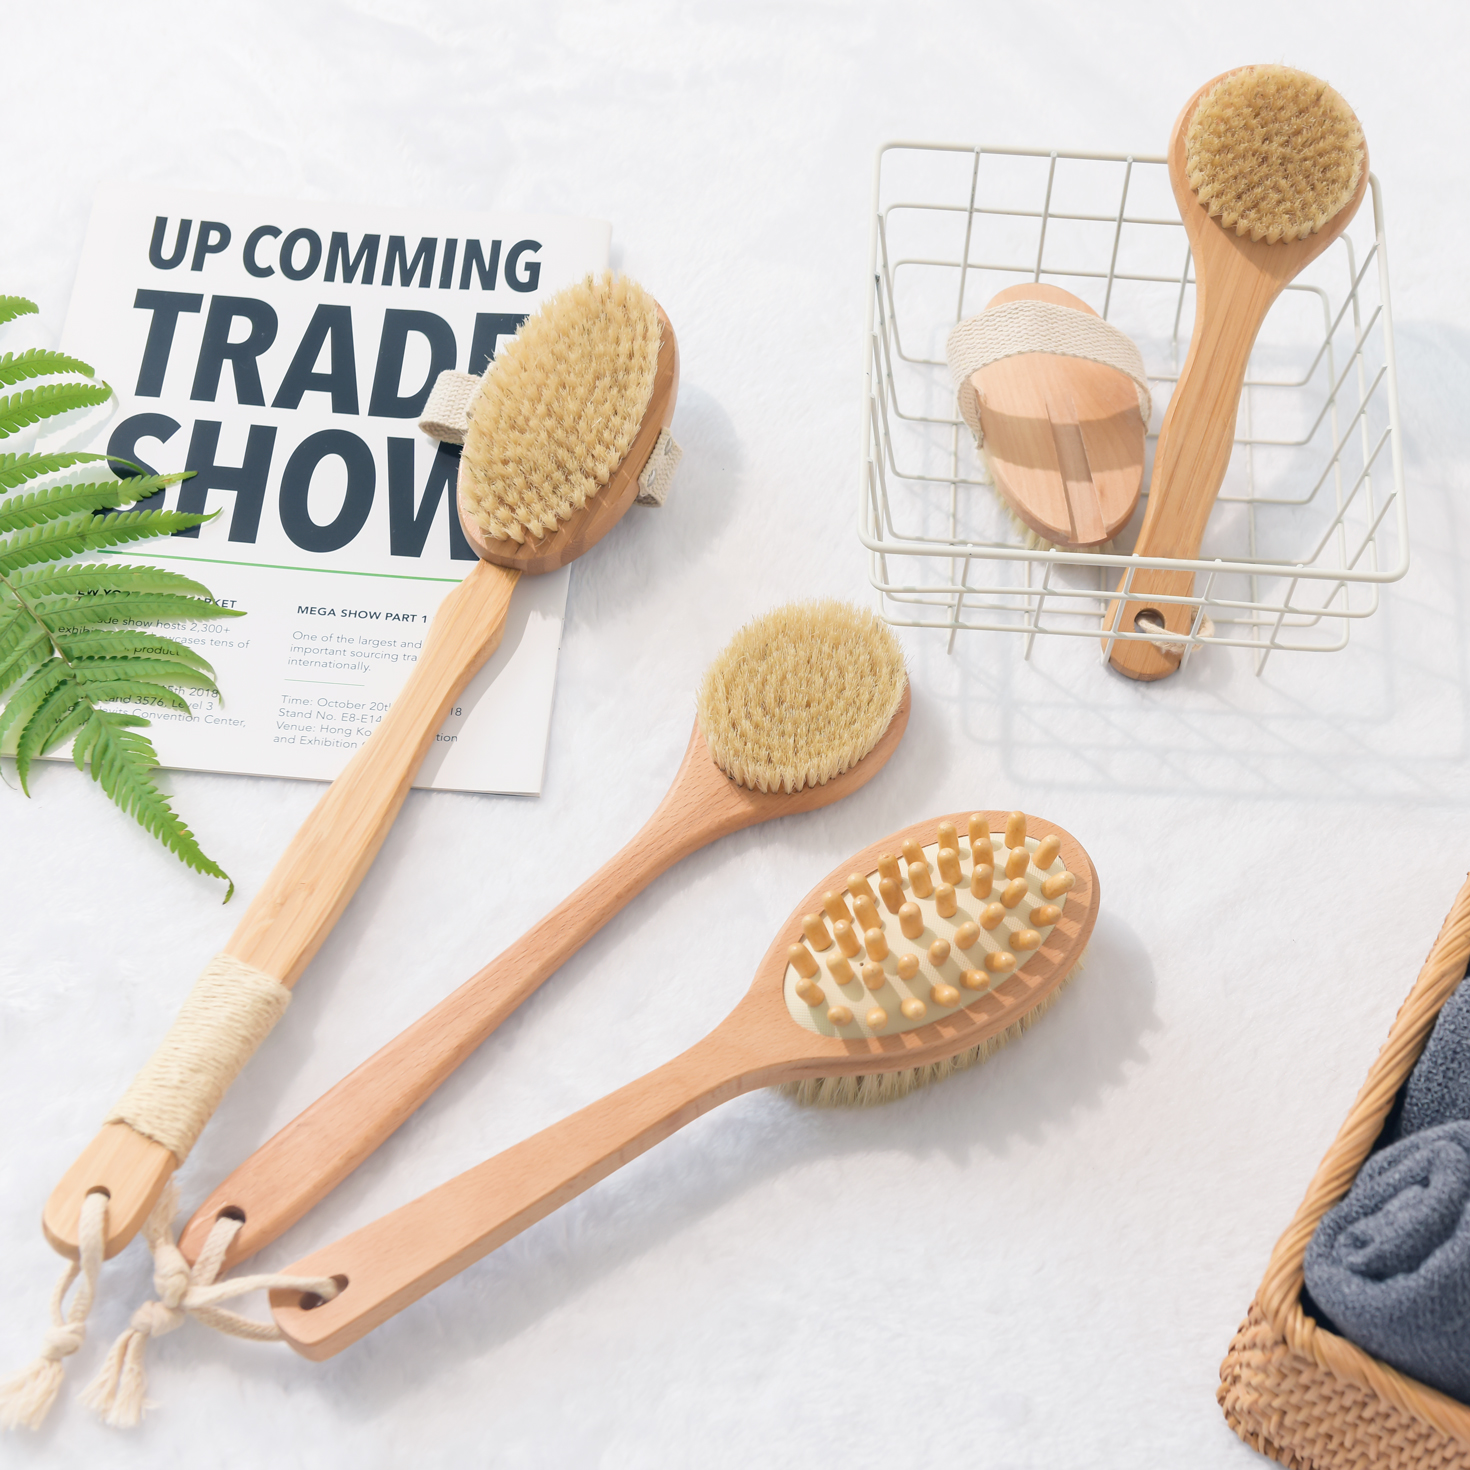 GreenLivingshk Launches an Eco-Friendly Loofah Sponge for a Greener Environment 